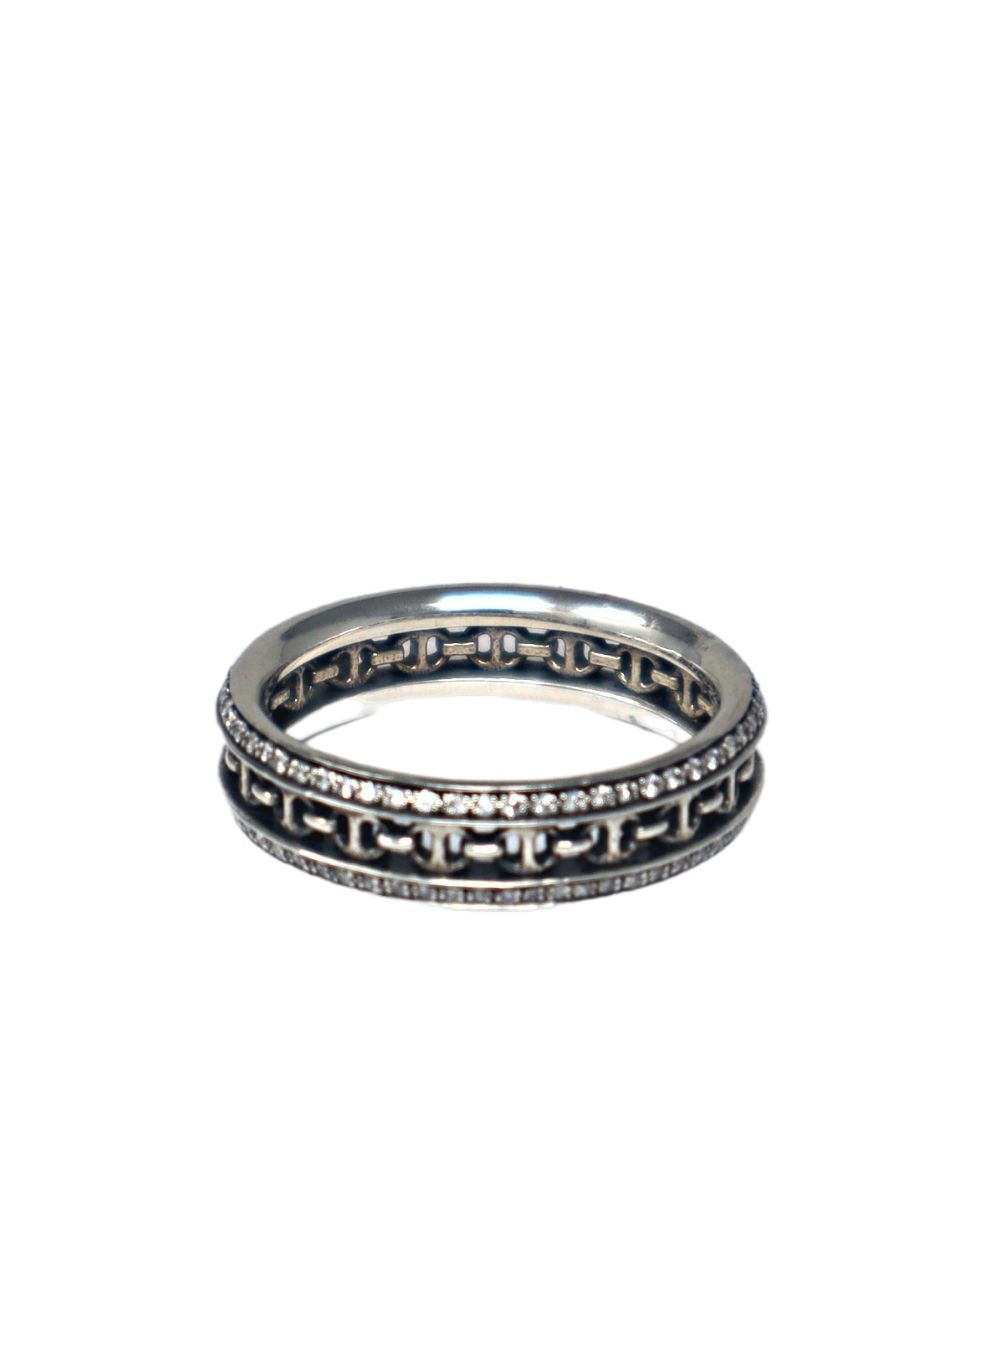 HOORSENBUHS | Chasis Band with White Diamonds in Sterling Silver